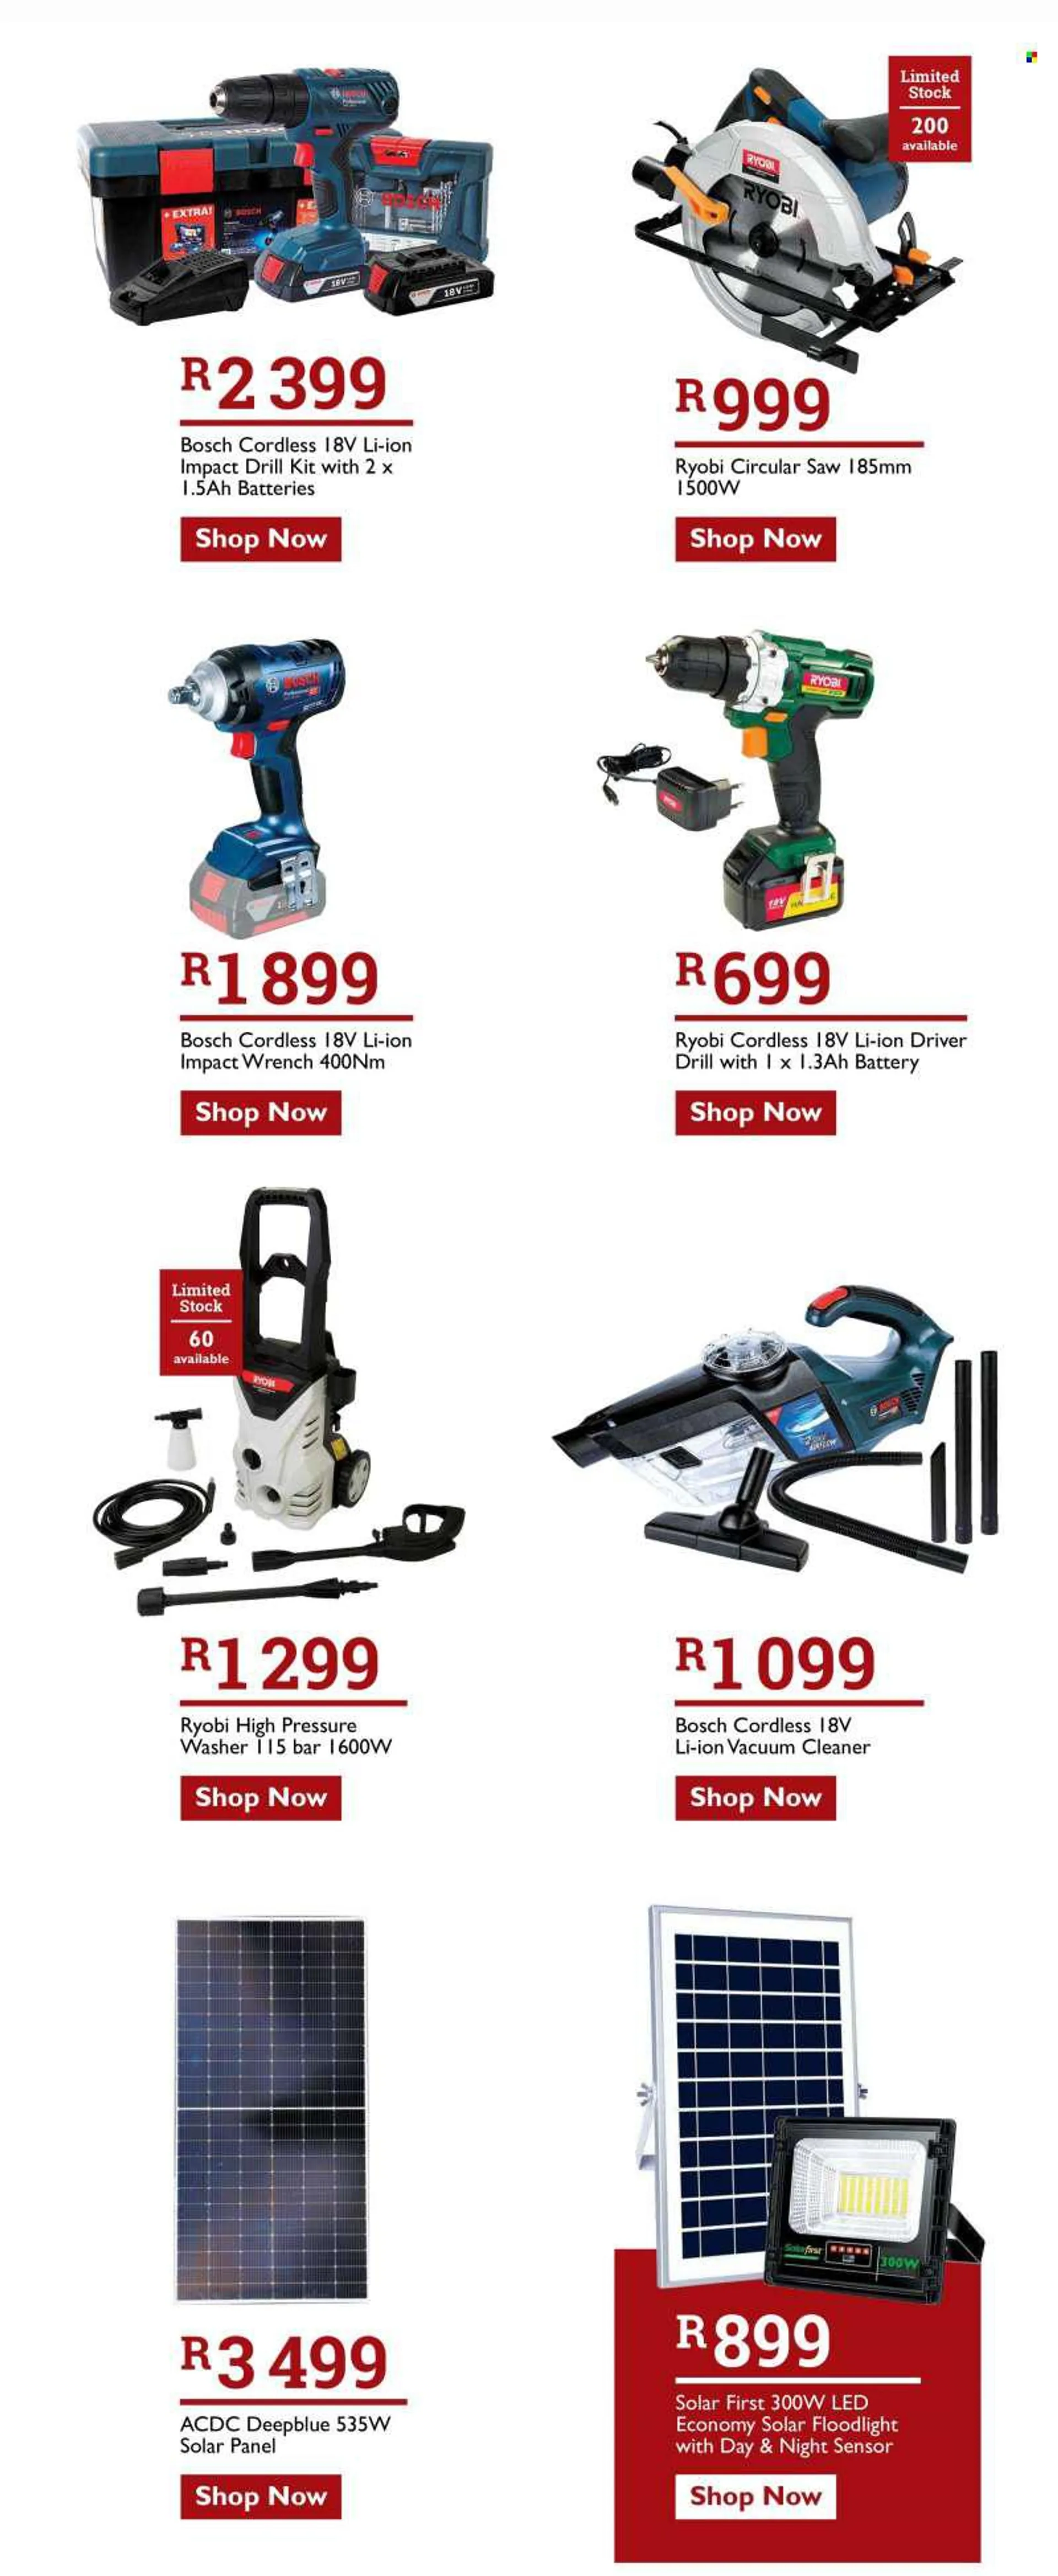 Brights Hardware catalogue  - 15/08/2022 - 02/10/2022 - Sales products - toilet, Bosch, Ariston, water heater, vacuum cleaner, ladder, adhesive, Dulux, Medal, ceiling lamp, floodlight, surge, solar panel, drill, Ryobi, circular saw, saw, table saw, socket